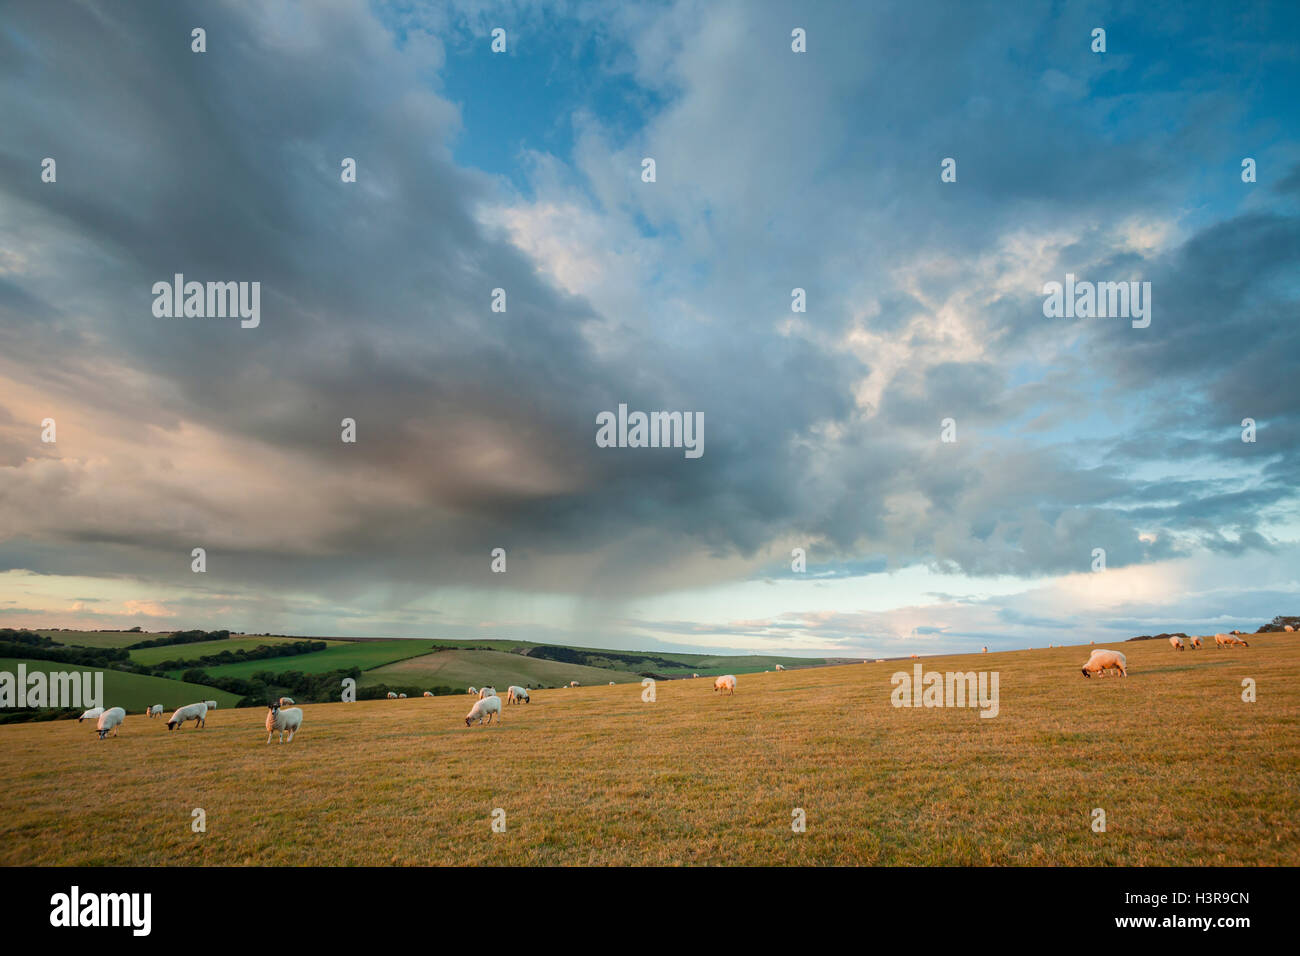 Stürmische Sonnenuntergang in South Downs National Park, East Sussex, England. Stockfoto